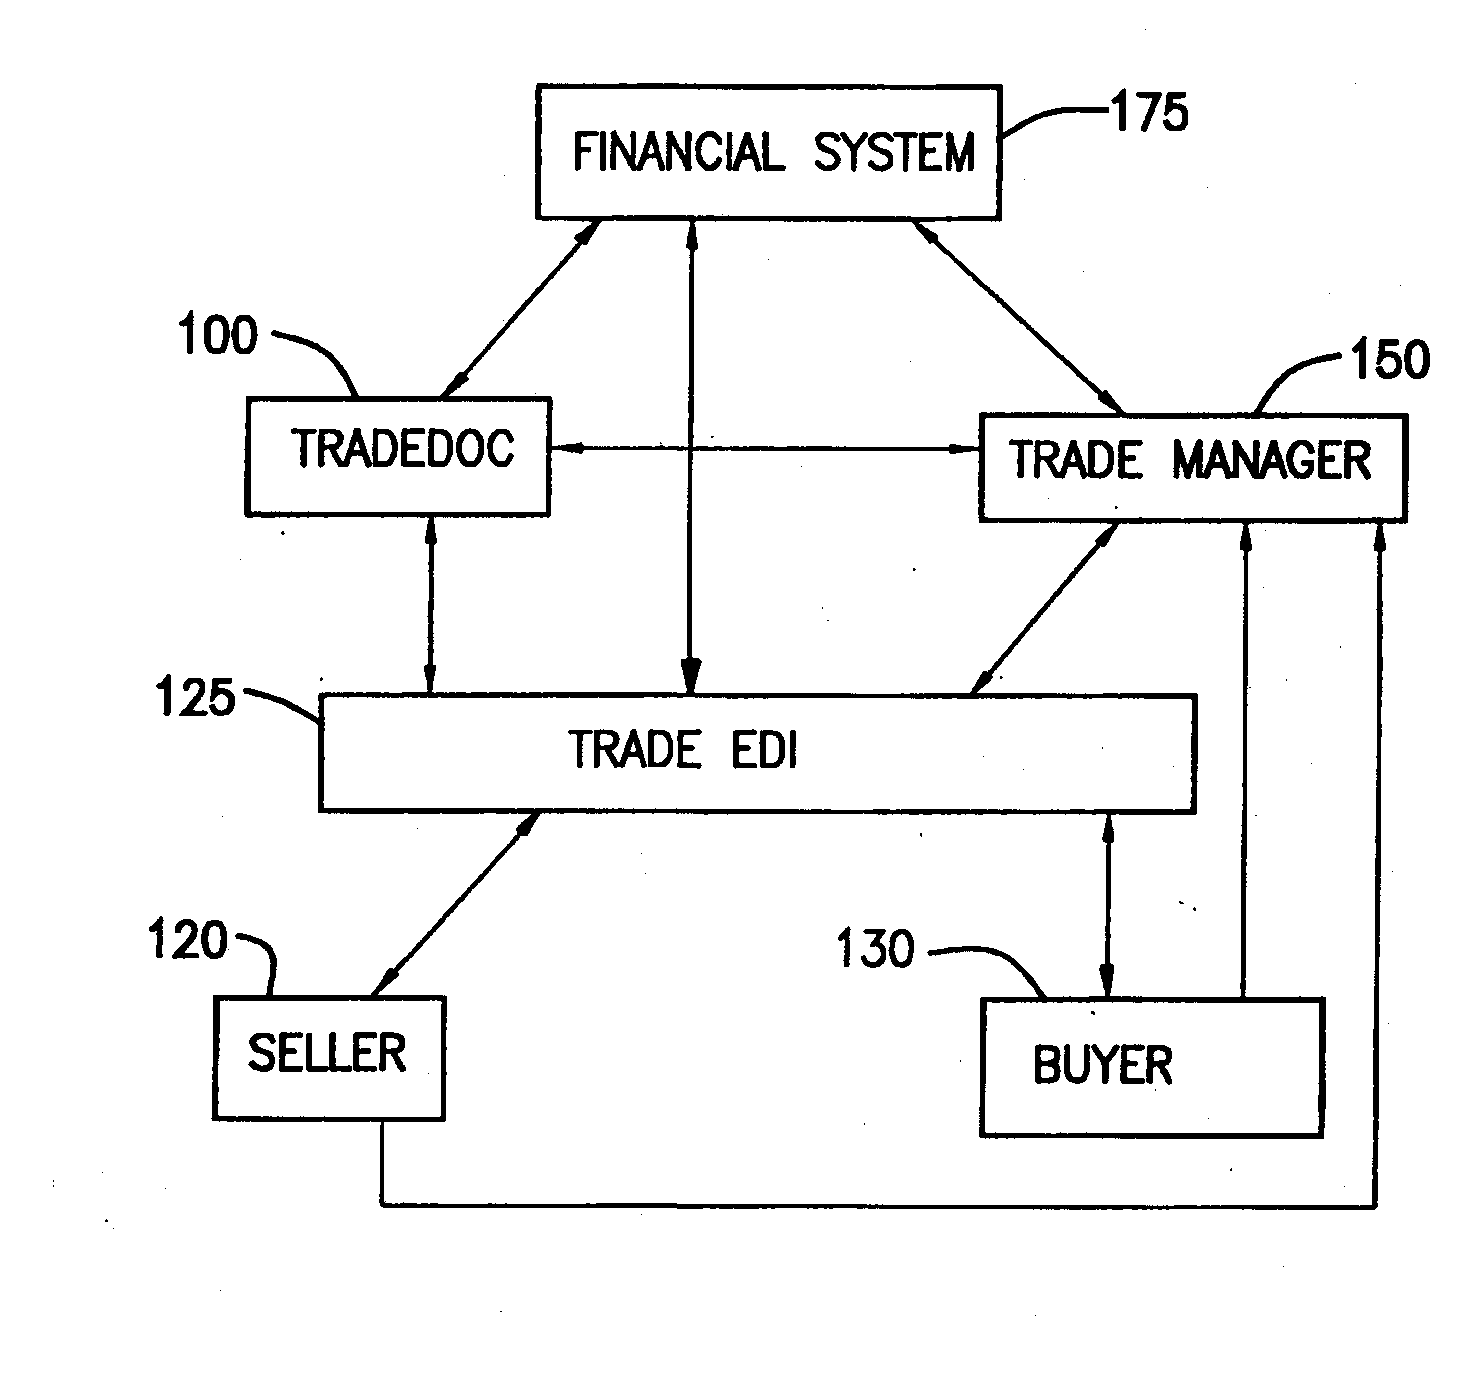 System And Method For Integrating Trading Operations Including The Generation, Processing And Tracking of Trade Documents